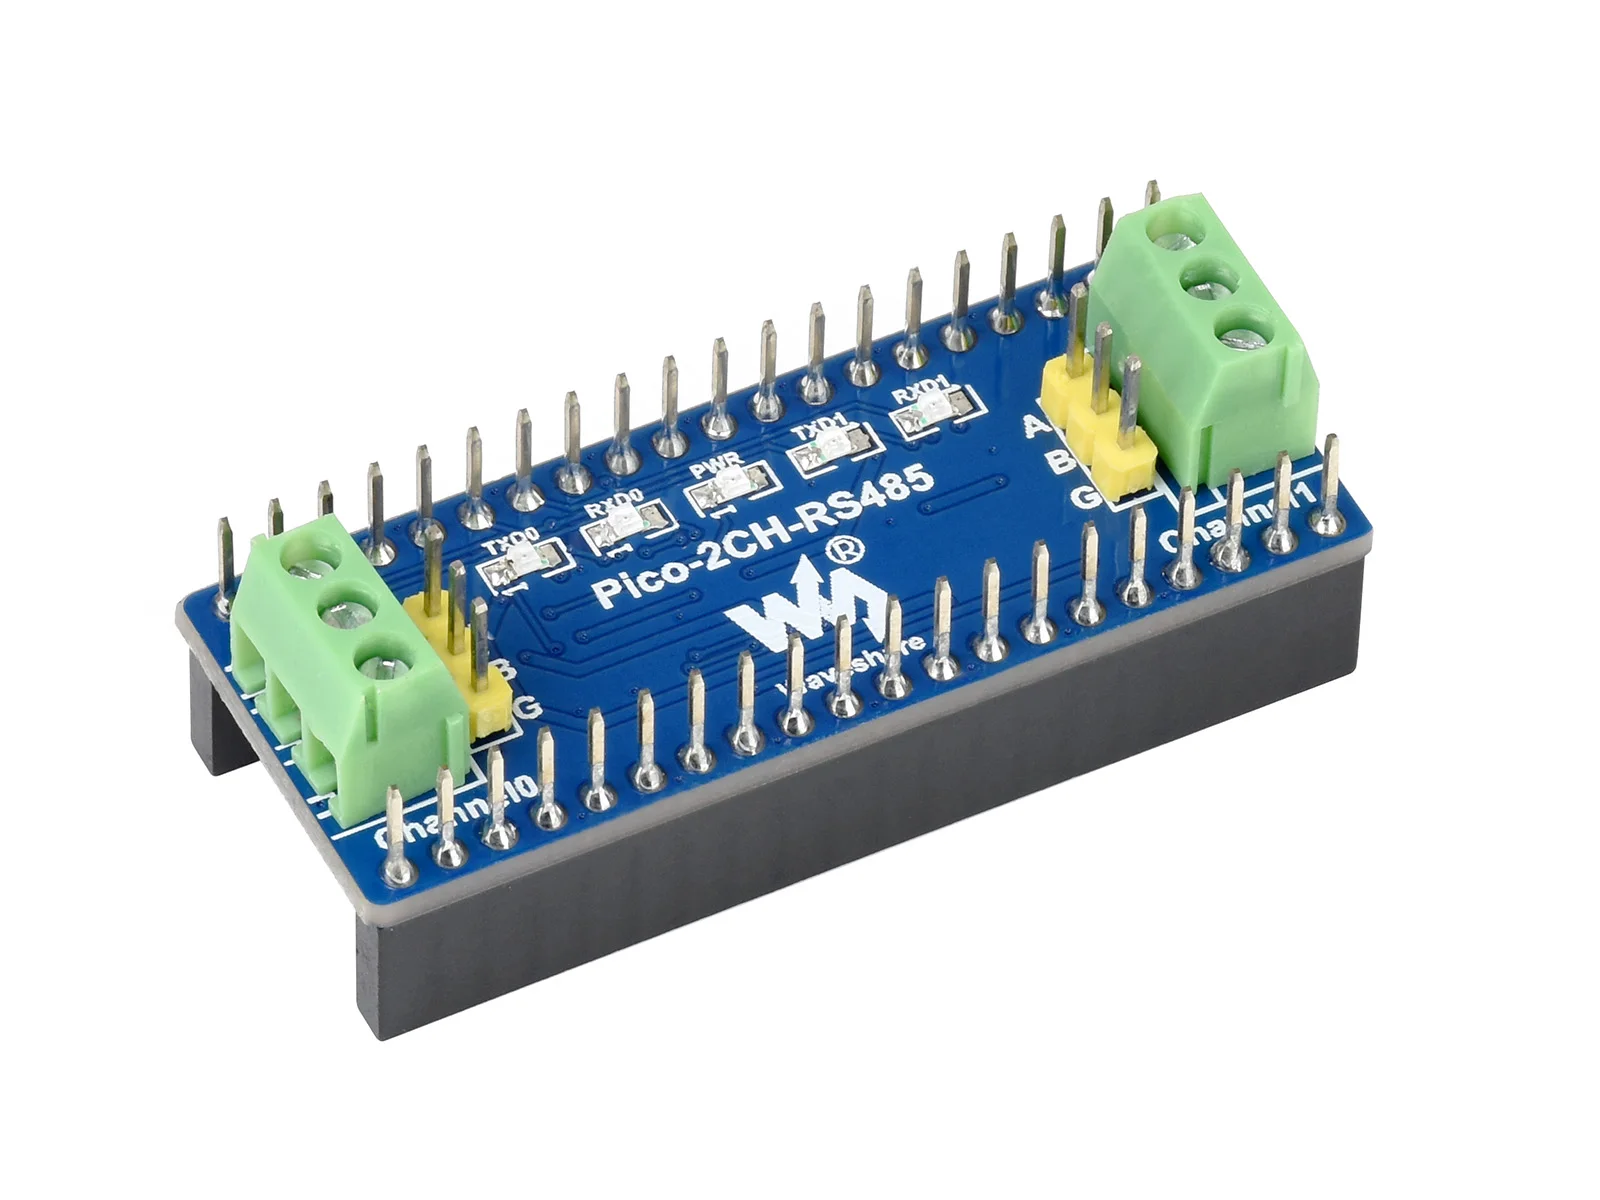 

Waveshare 2-Channel RS485 Module for Raspberry Pi Pico, SP3485 Transceiver, UART To RS485, Standard Pi Pico header